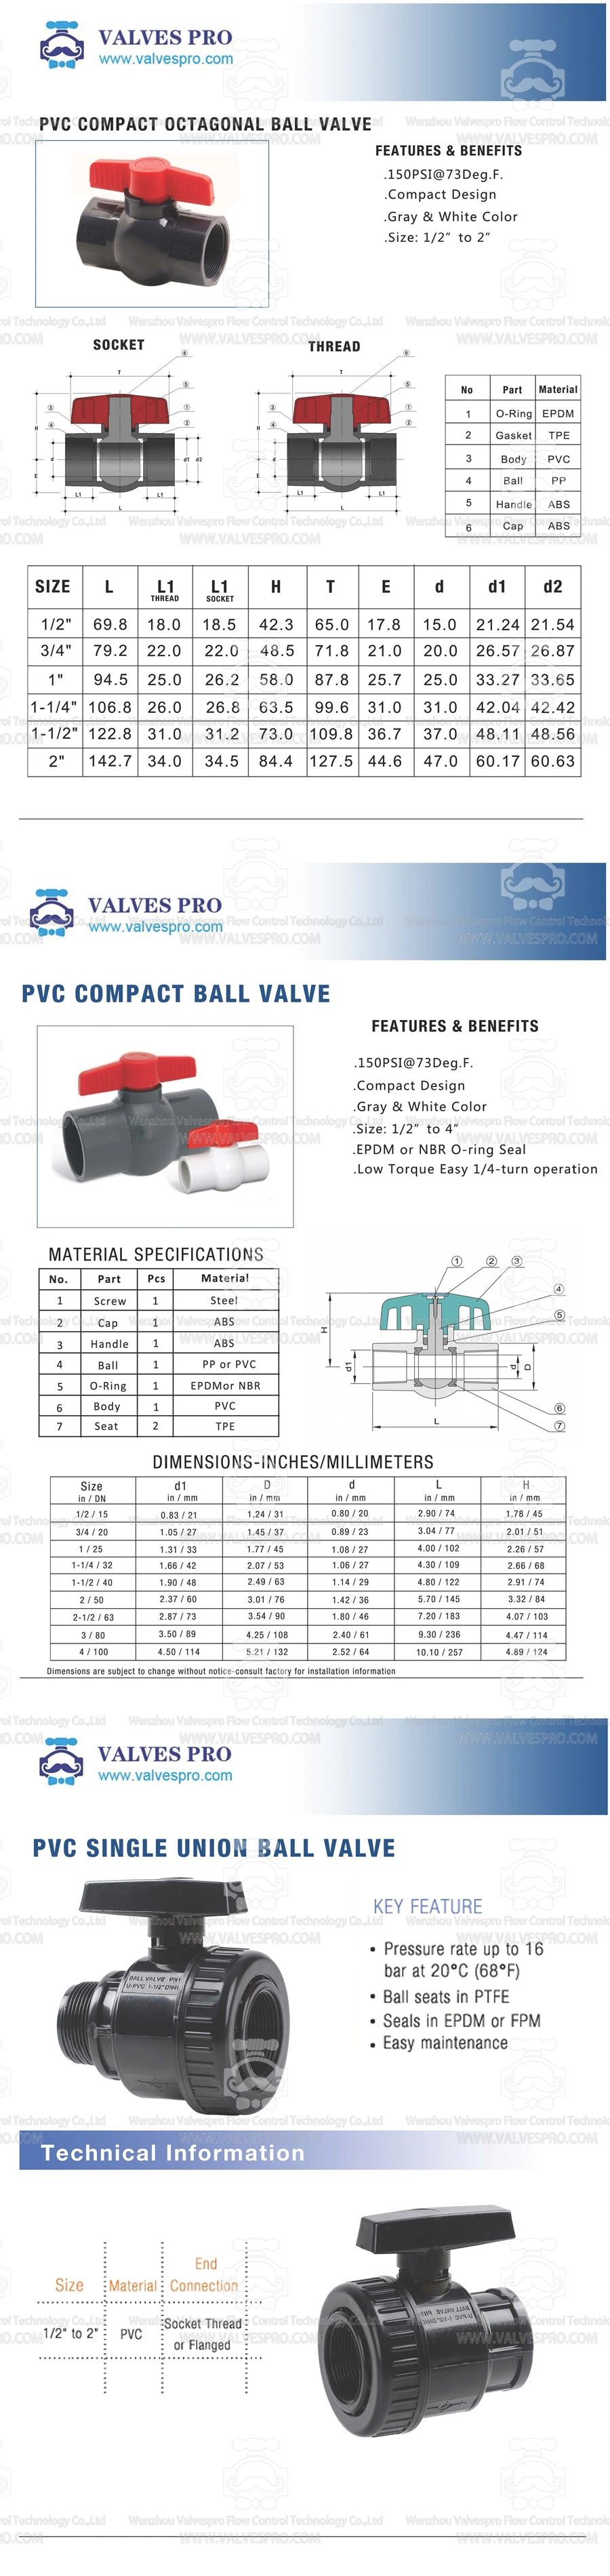 PVC Gate Valve Knife Gate Valve with Stainless Steel Paddles